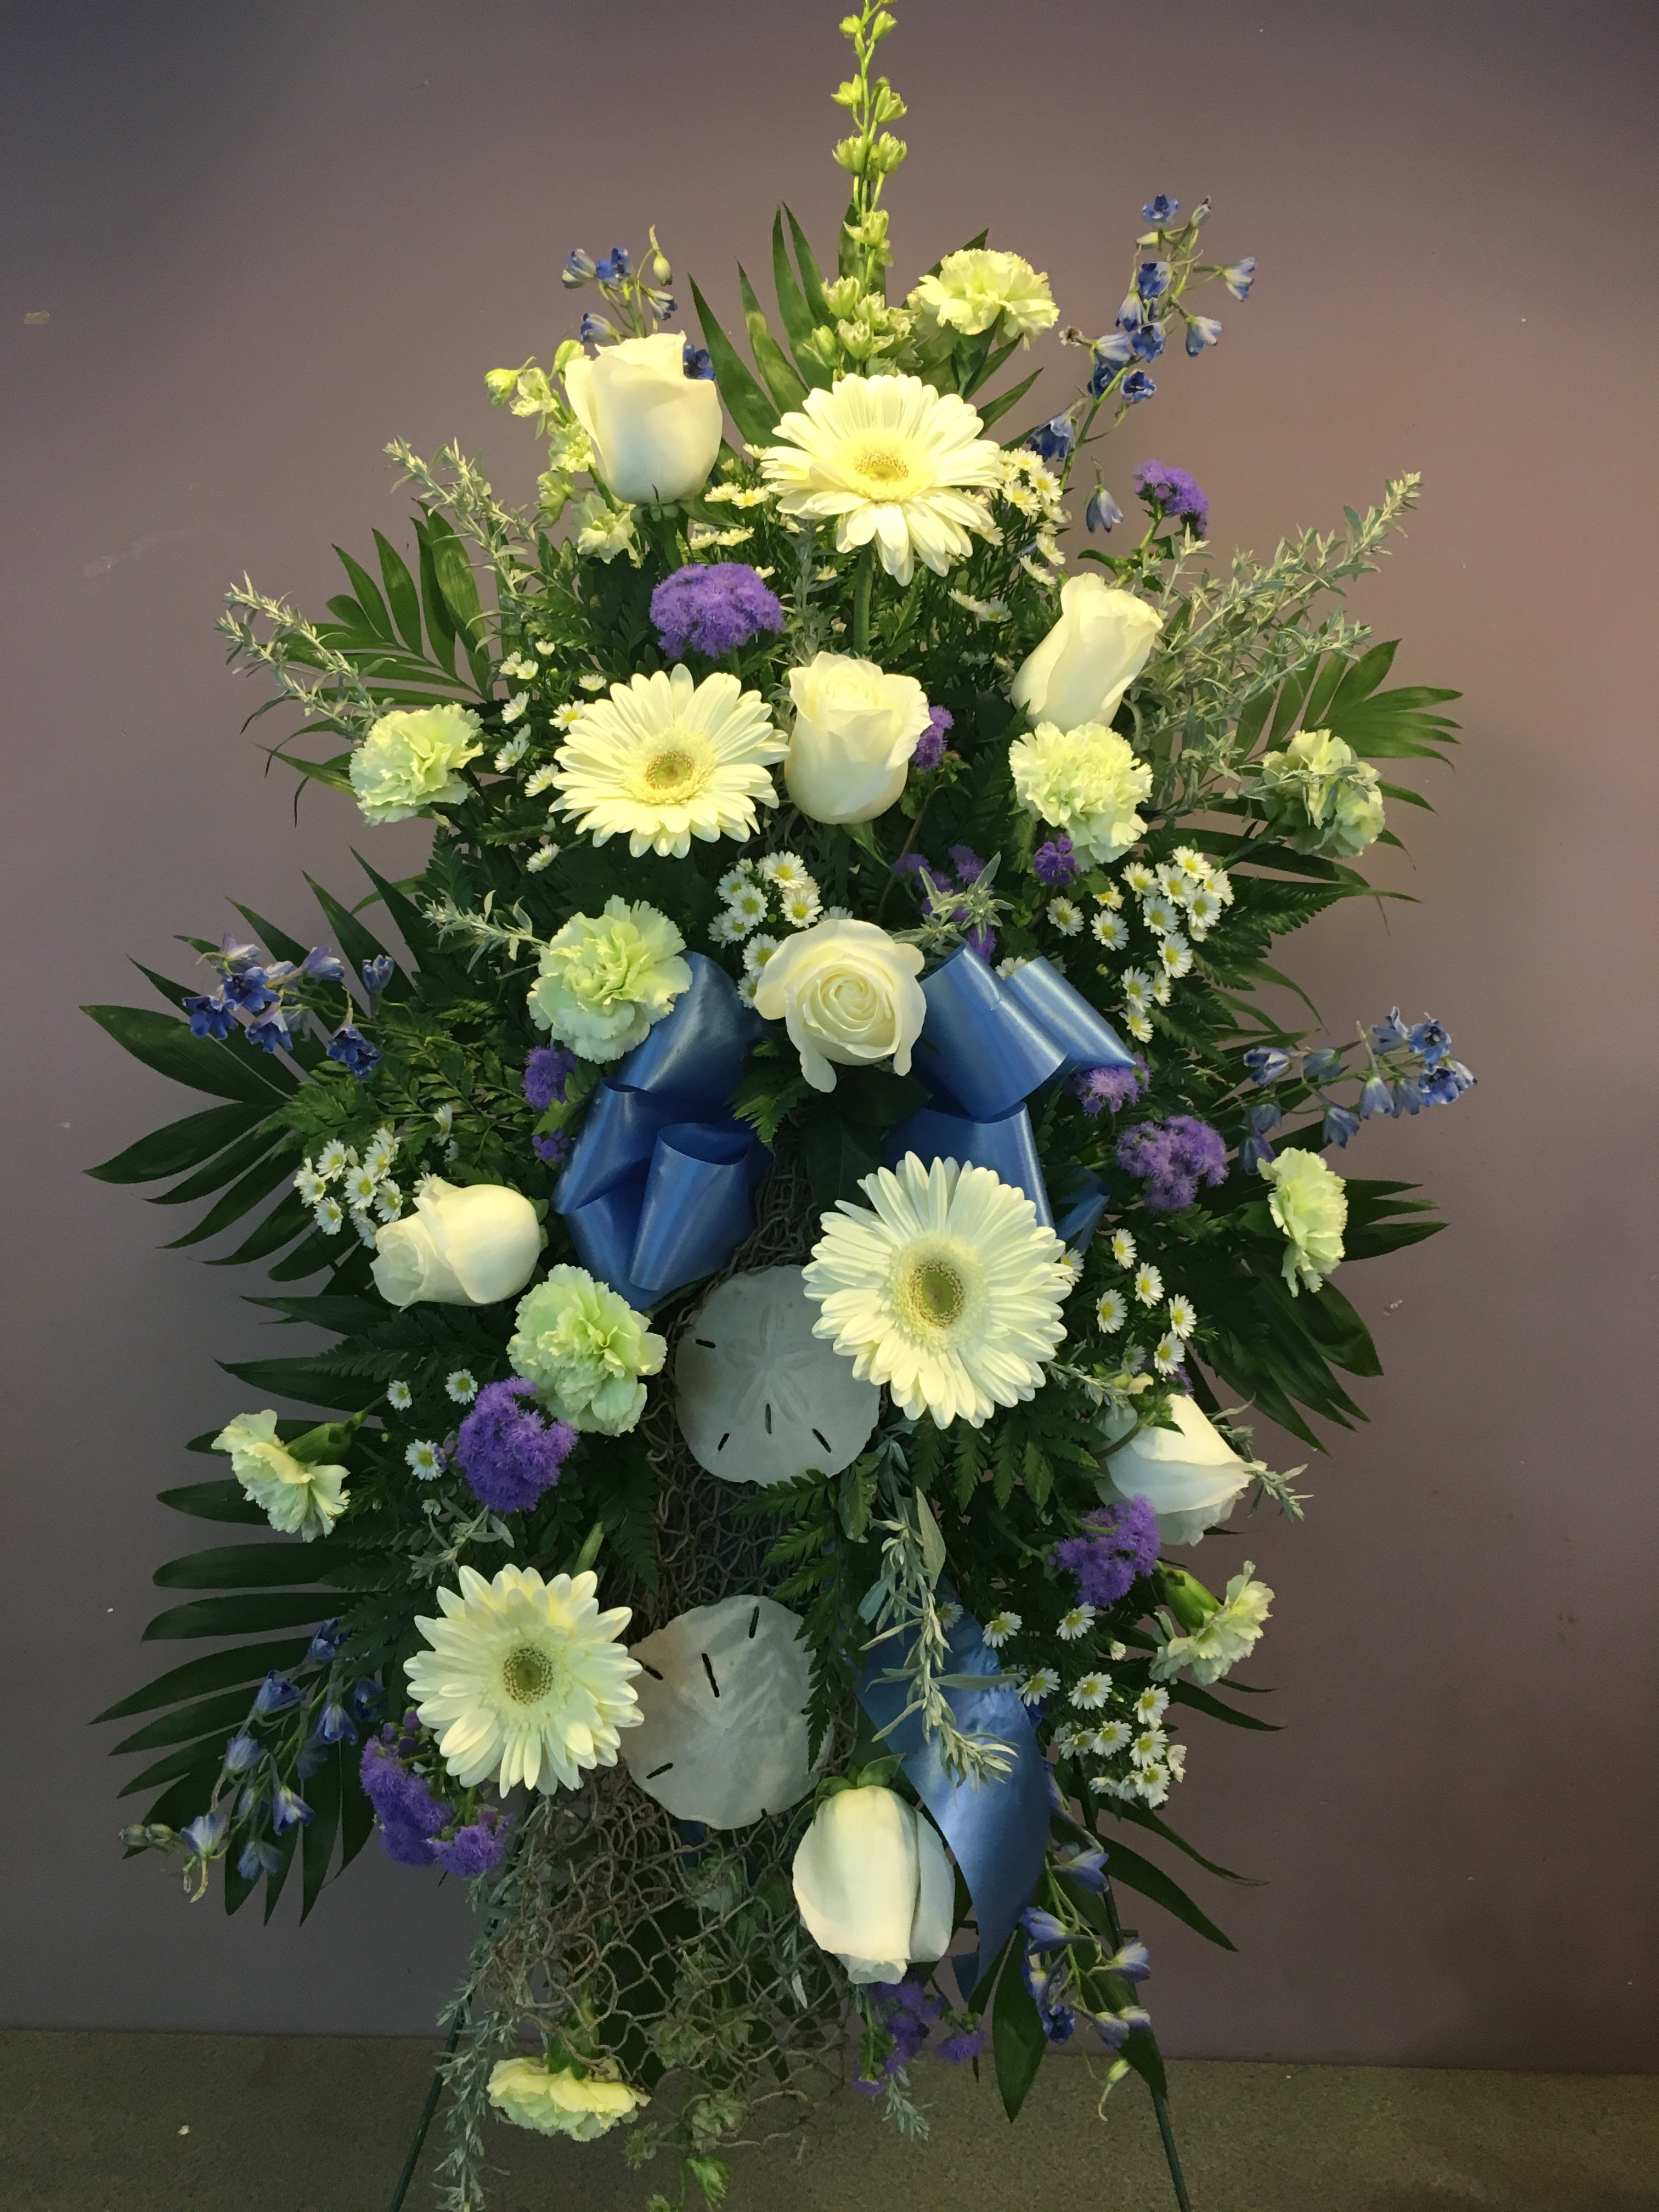 Sea Spray (SS) - A beautiful spray of flowers such as blue delphinium, white roses, green dianthus and other complimenting accent flowers adorned with fishermans net and sand dollars.   Flowers and colors may differ from picture based on availability.